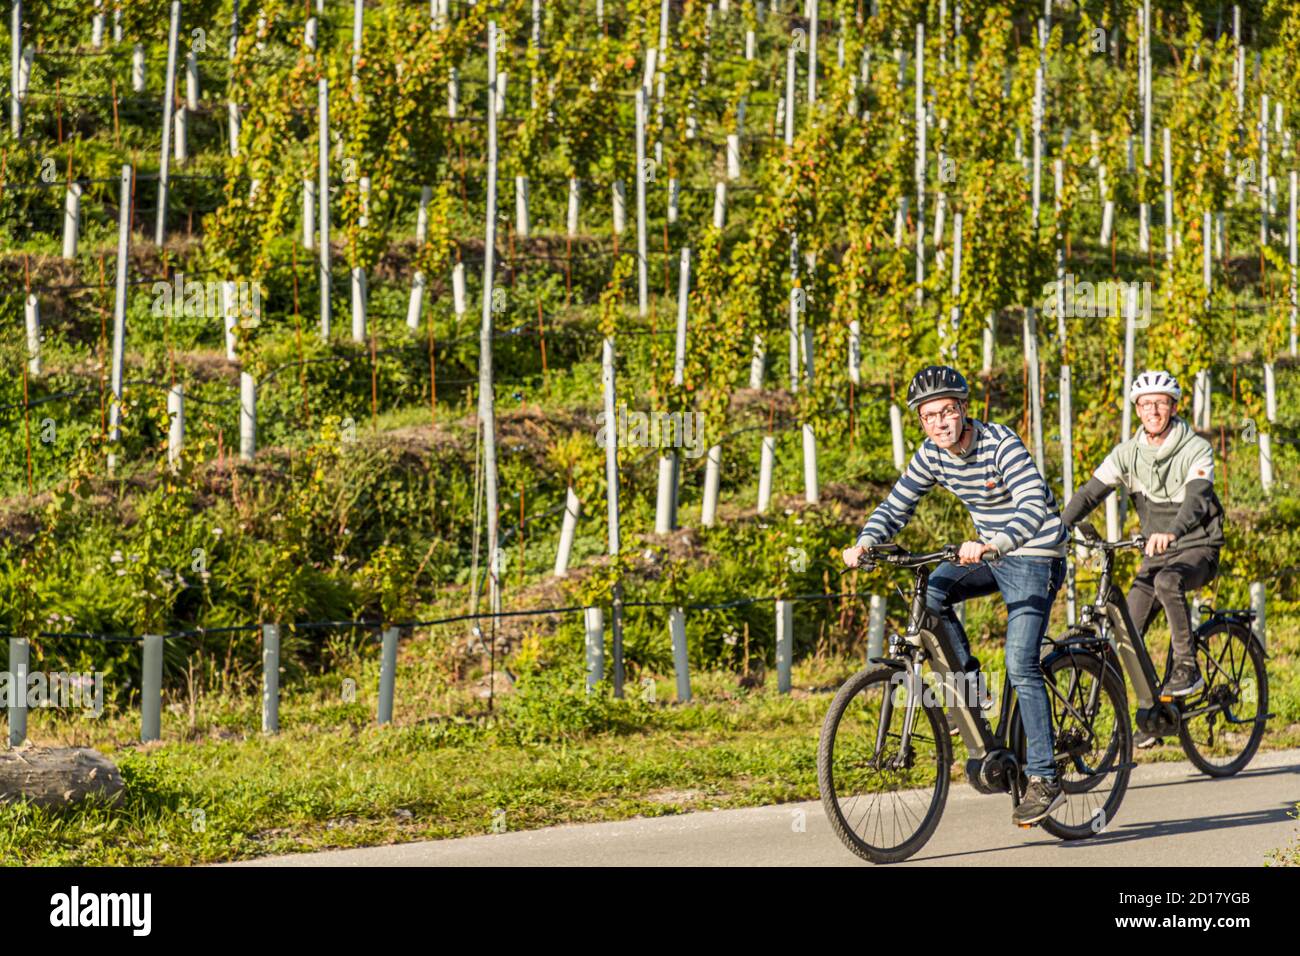 Bonvin Winery in Sion, Switzerland. With the e-bikes through the vineyards. Les Cellliers de Sion offers picnics and tastings Stock Photo